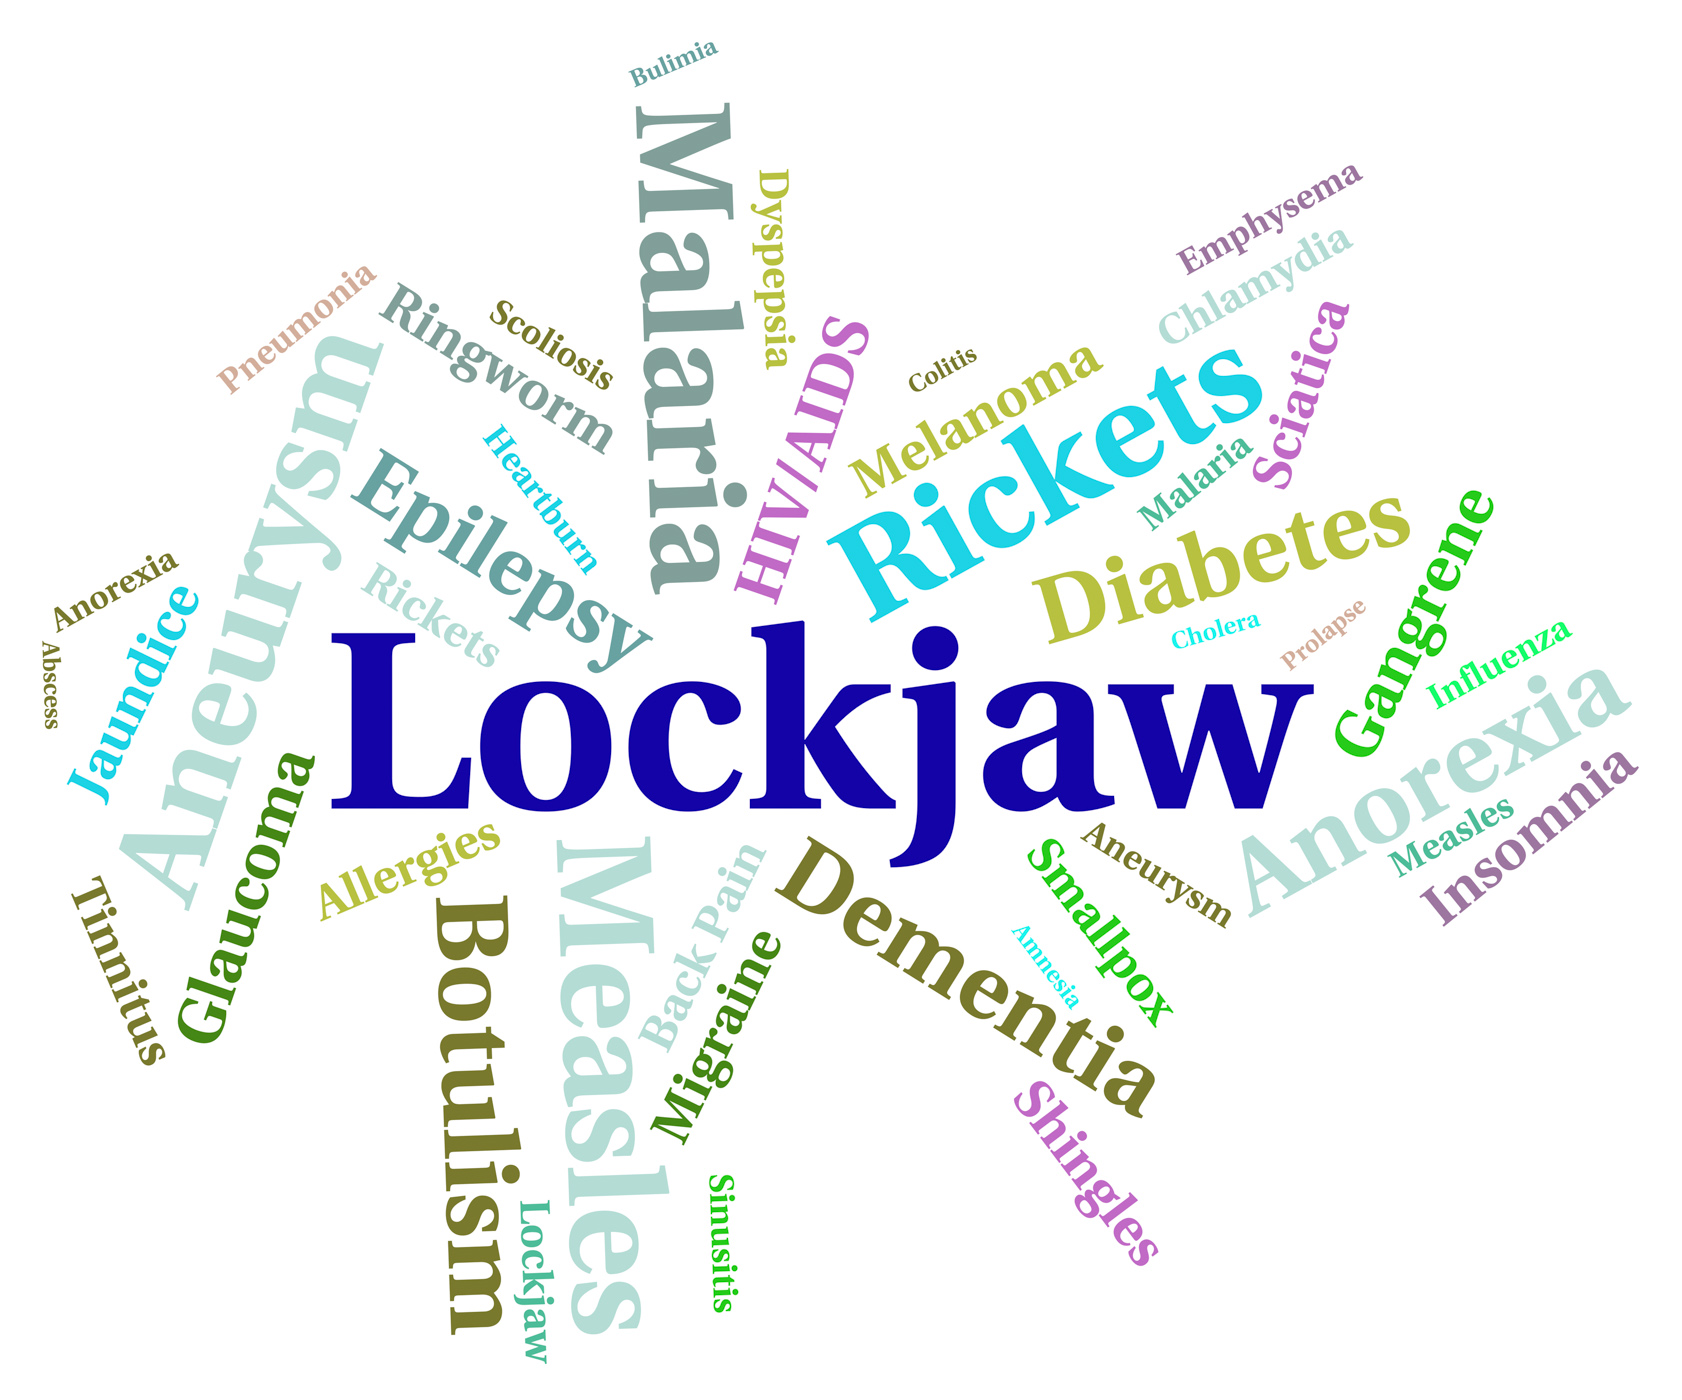 Lockjaw illness represents complaint malady and trismus photo